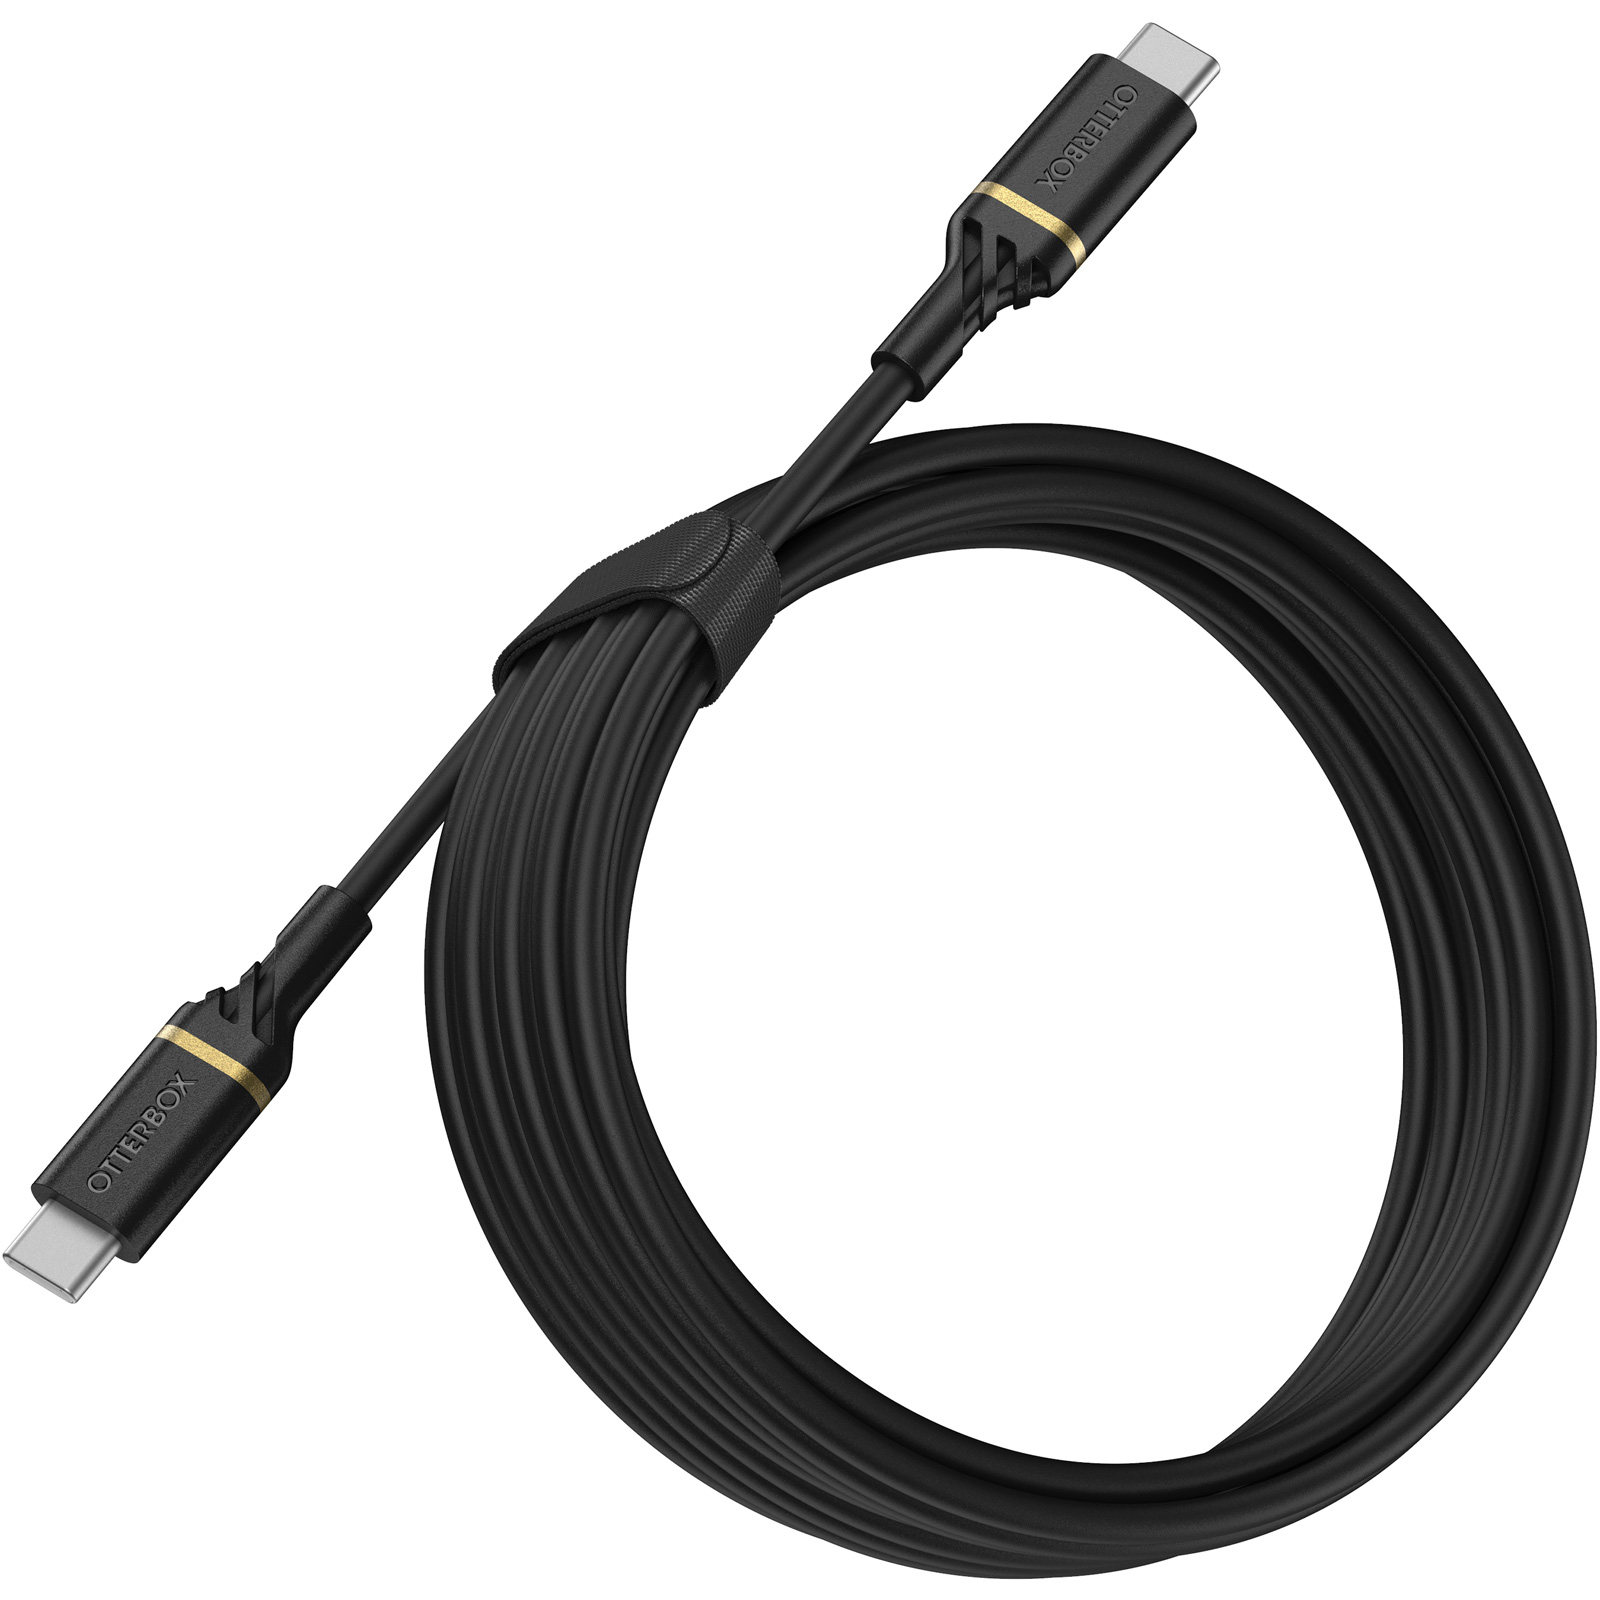 Buy Juice USB to Micro USB 3m Charging Cable - Black